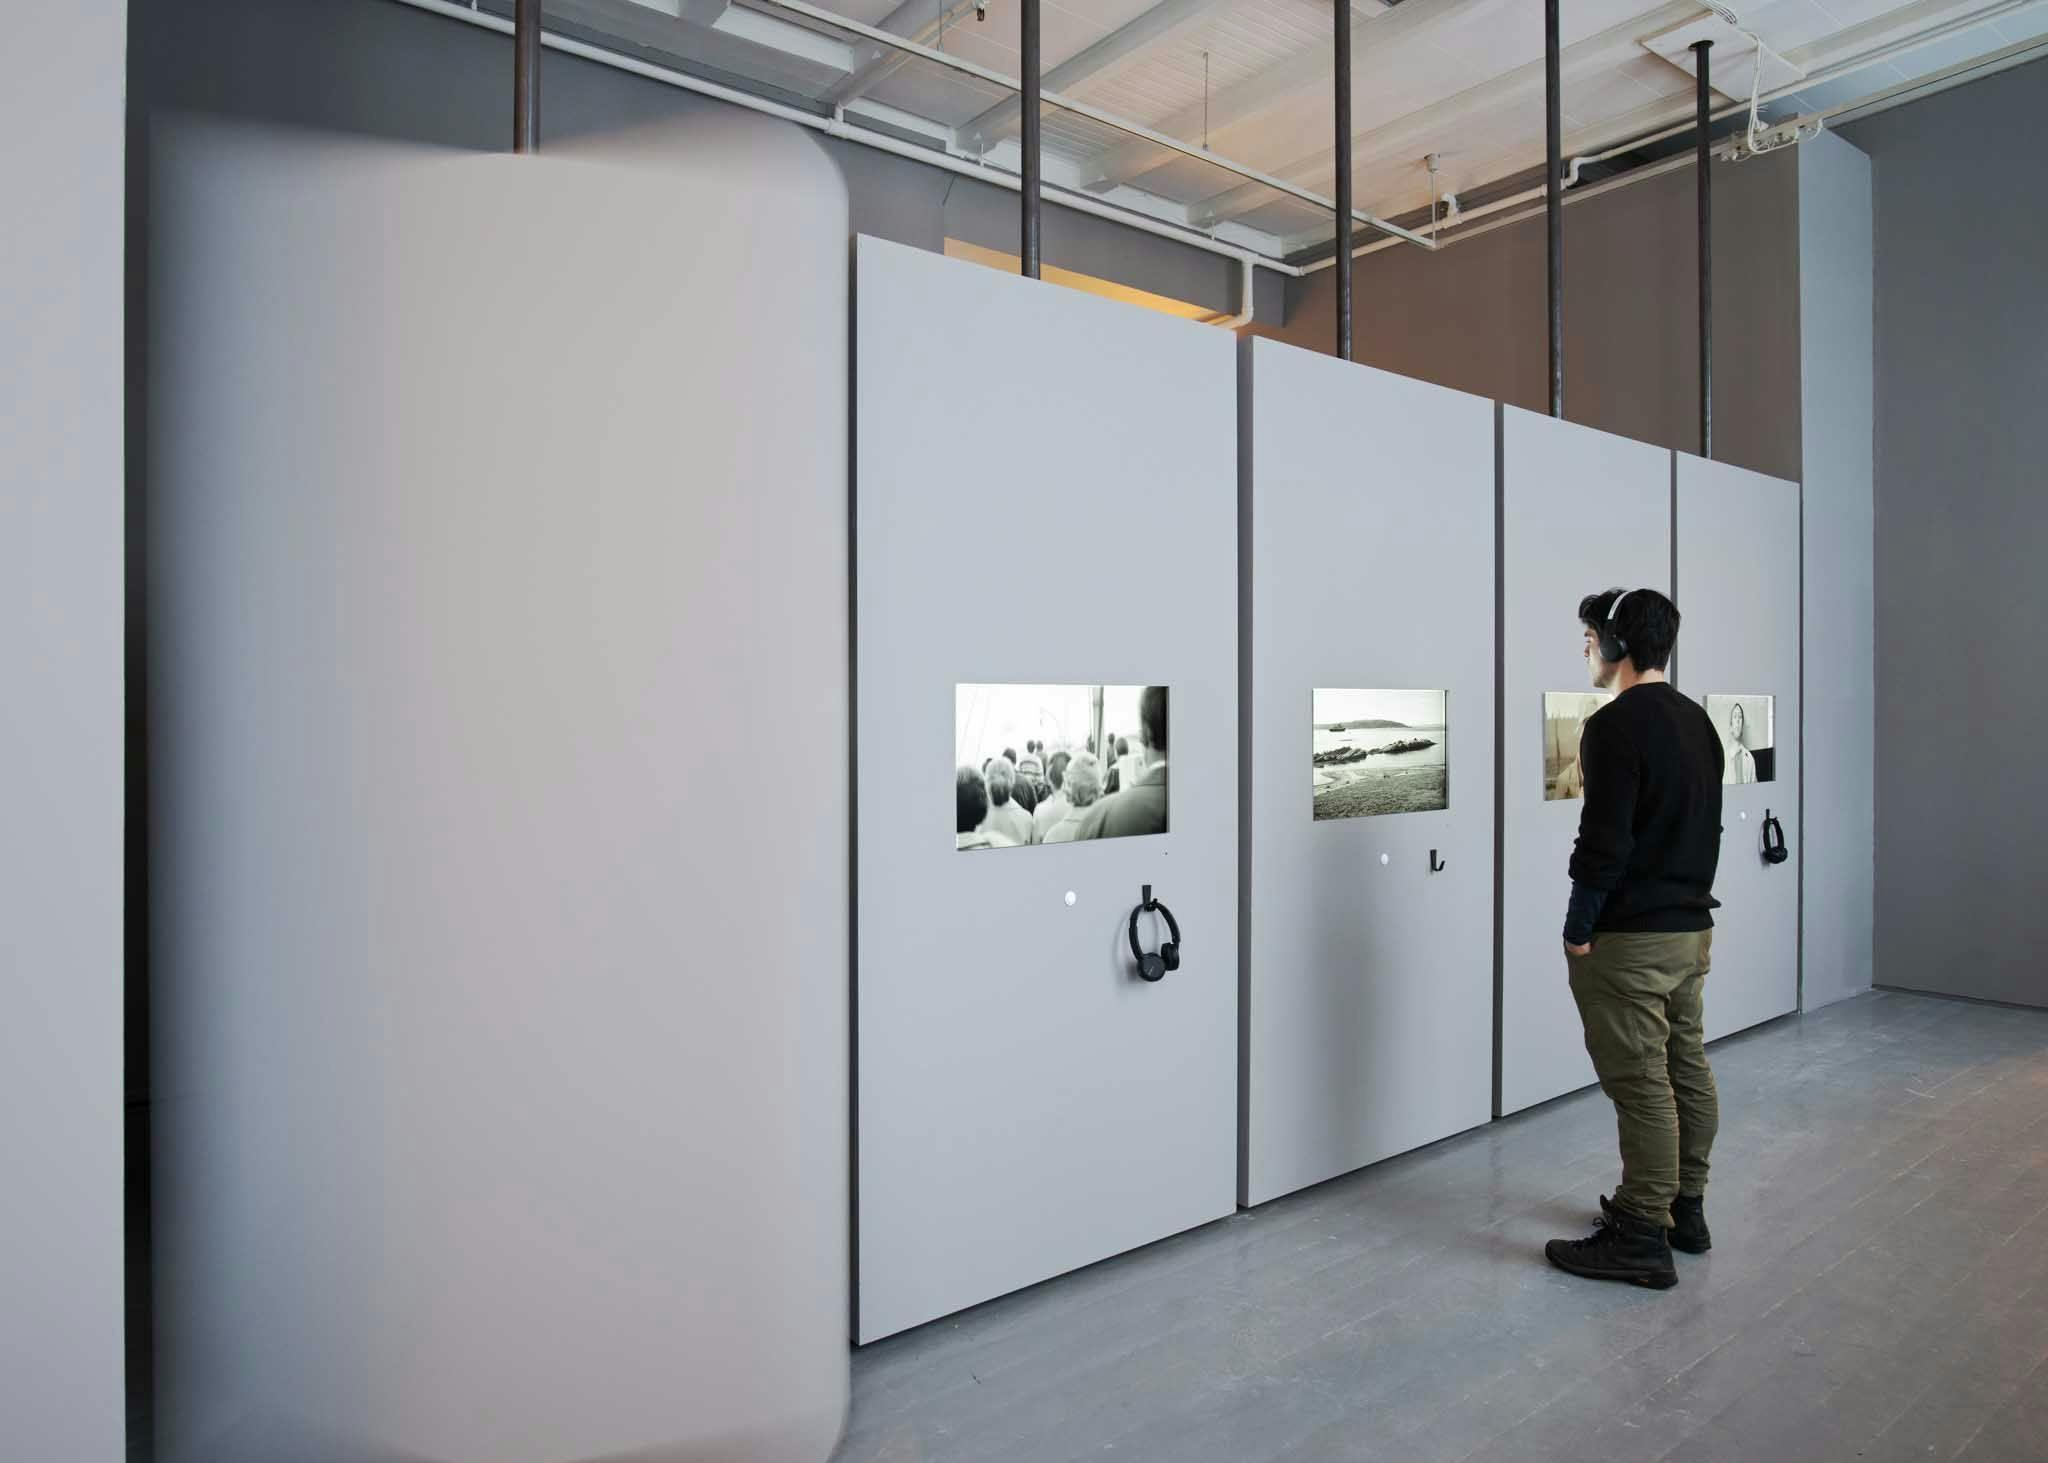 A man watches a black and white film in an installation, listening through headphones